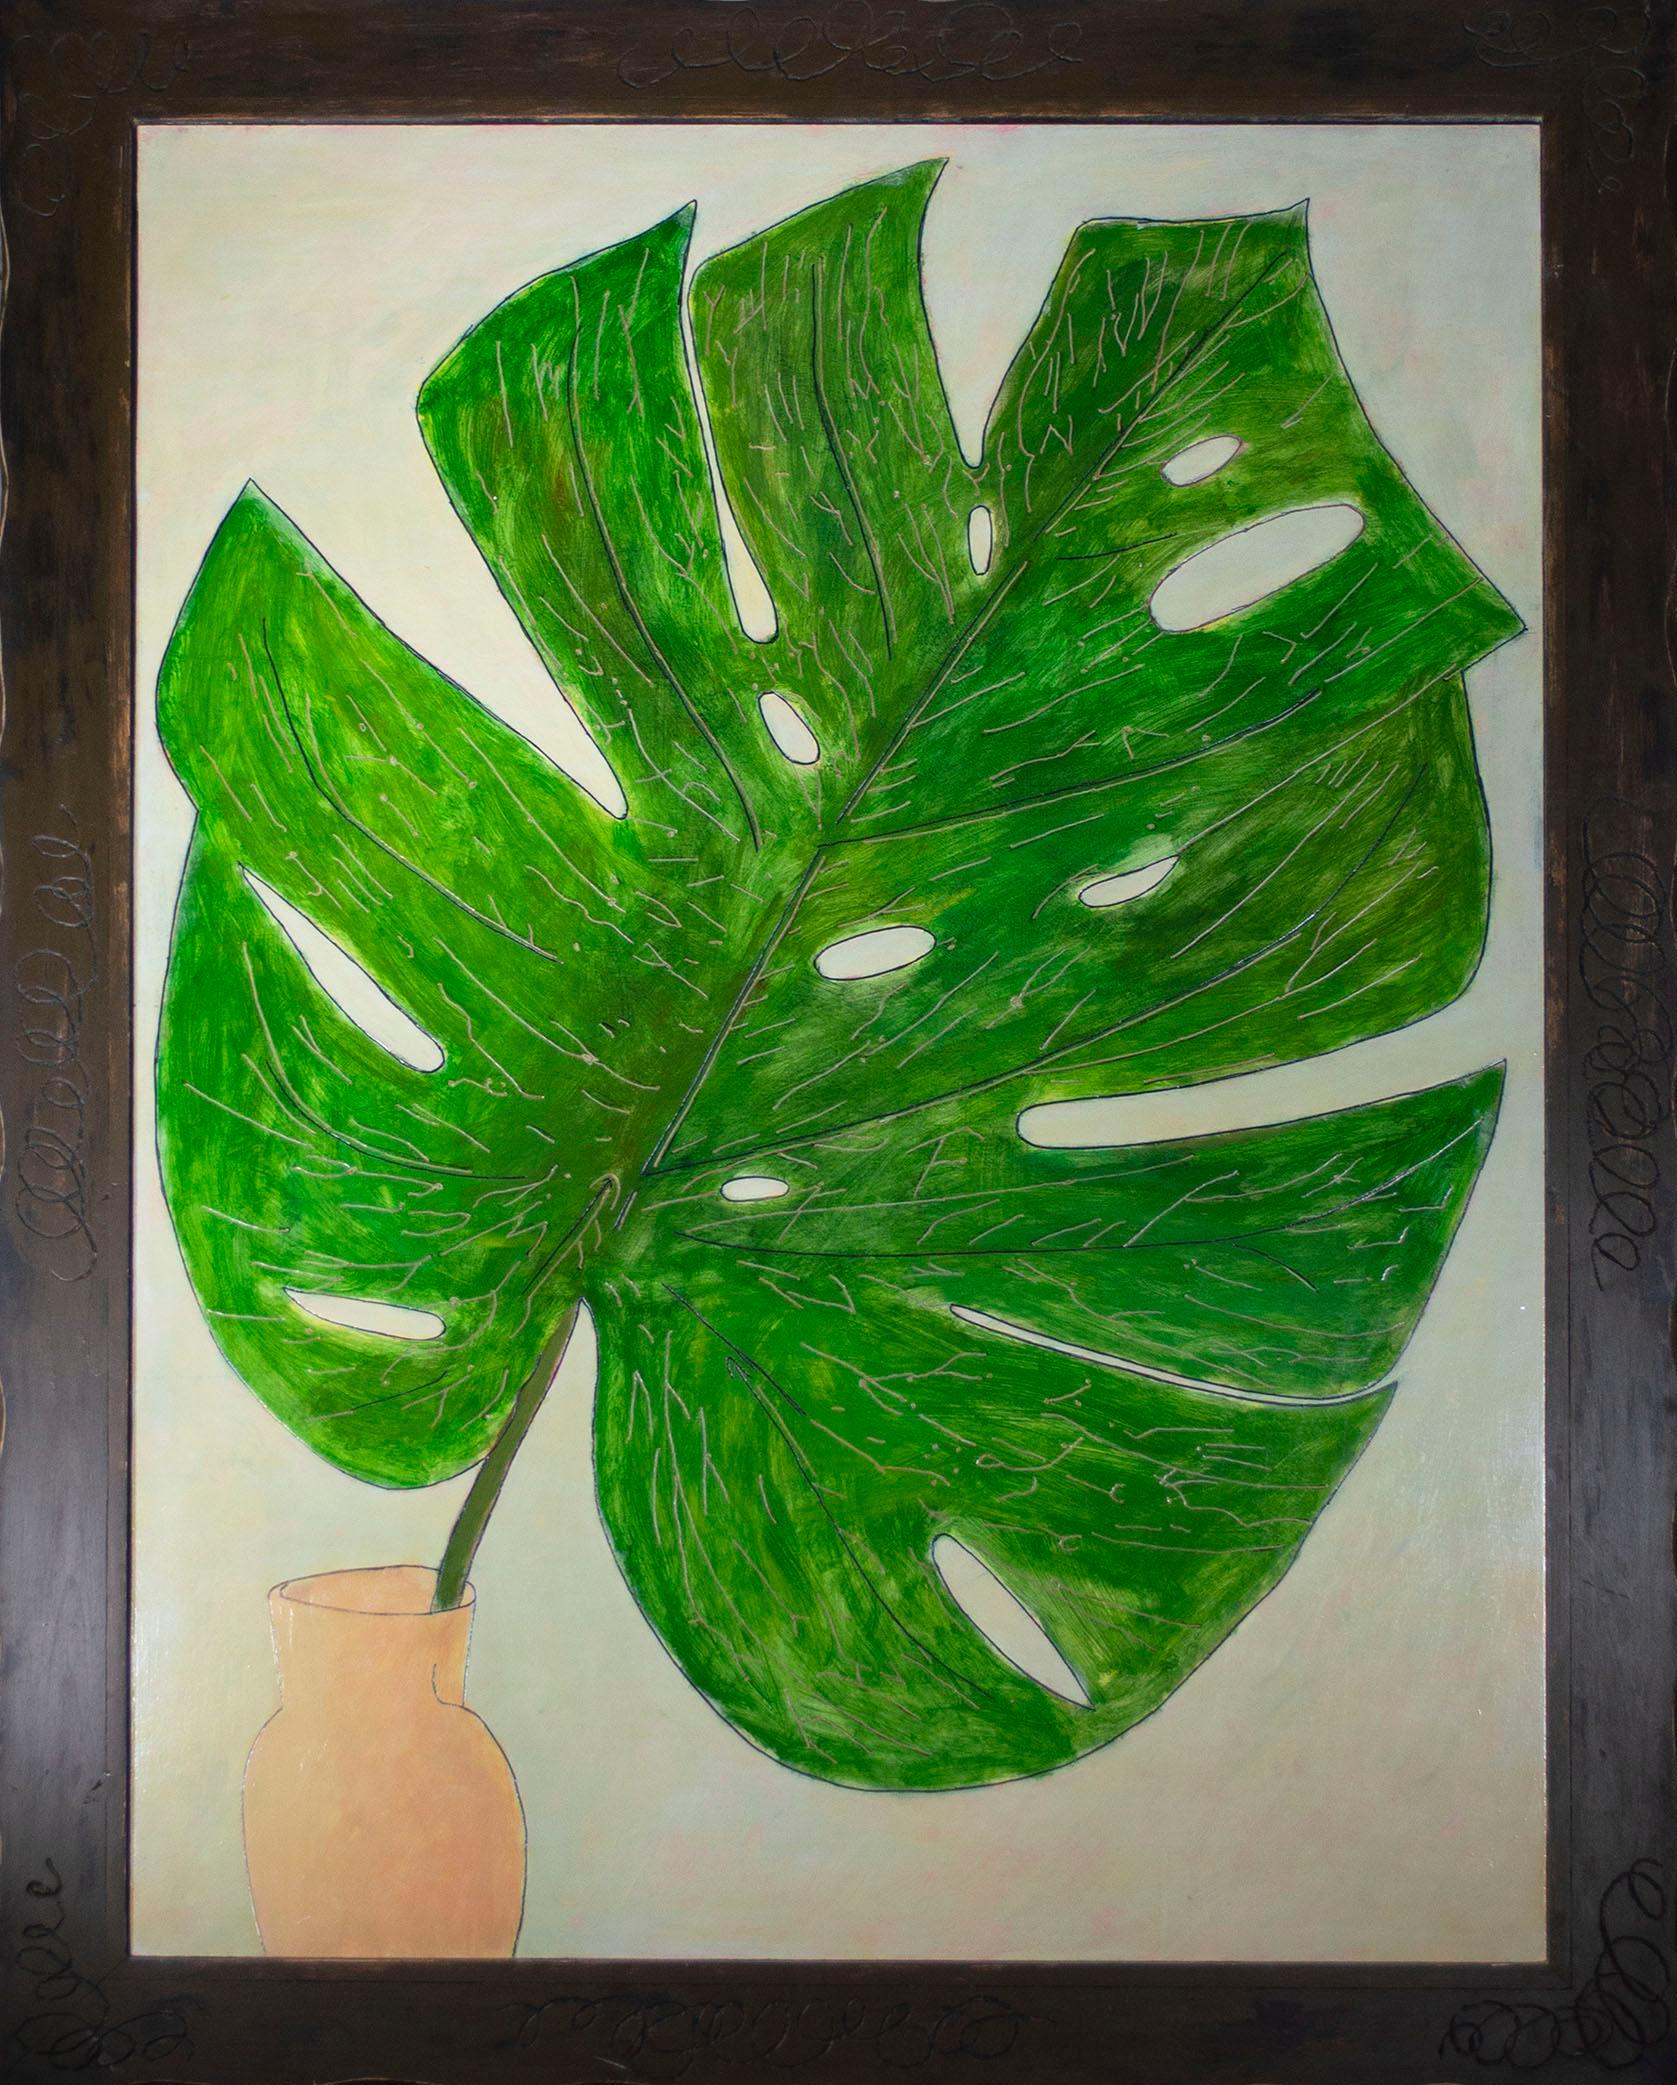 In this painting, Robert Richter presents the viewer with a still life of a massive Swiss cheese plant leaf emerging from a small ceramic jug. Though the leaf is a common tropical houseplant and the jug seems to recall American folk pottery, the